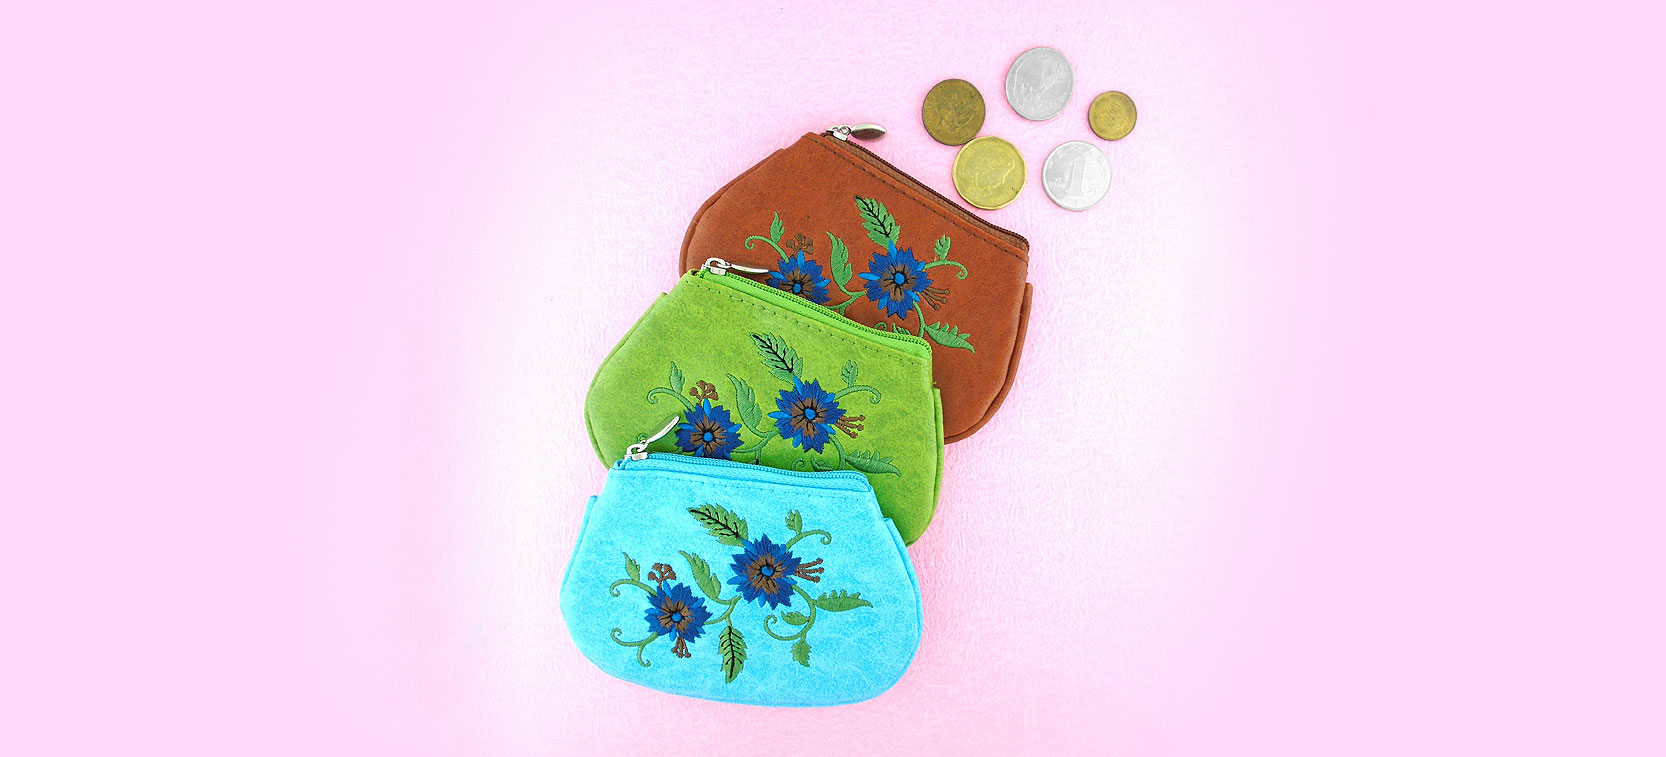 LAVISHY design and wholesale vegan coin purses to gift shops, boutiques and book stores in Canada, USA and worldwide.